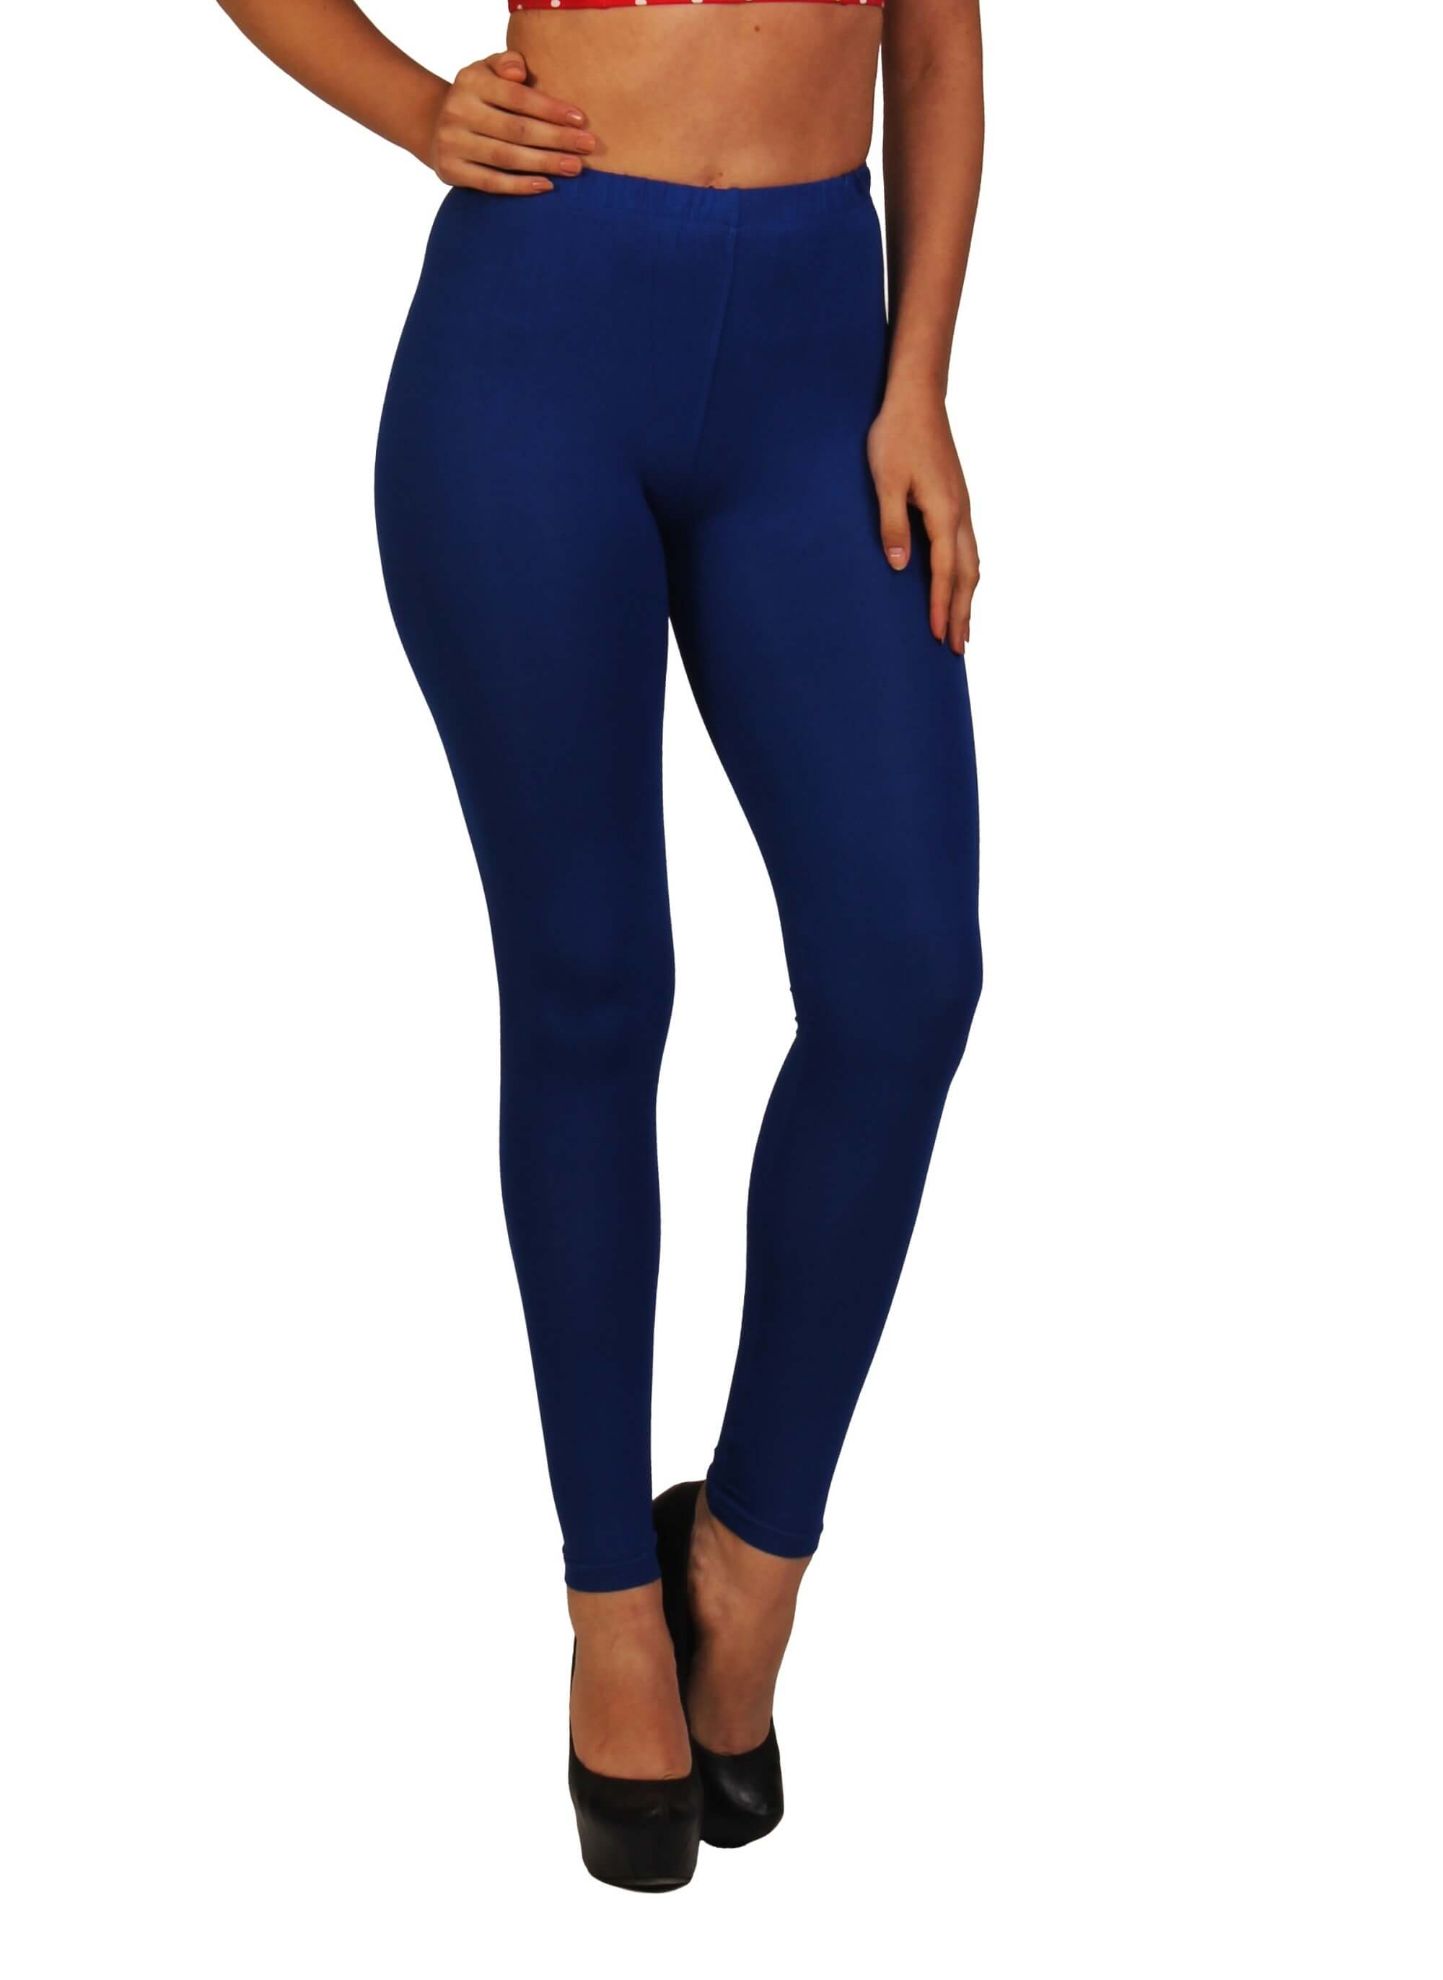 4-Way Lycra Legging With Diamond Cut in Tirupur at best price by Lucky  Dreams - Justdial